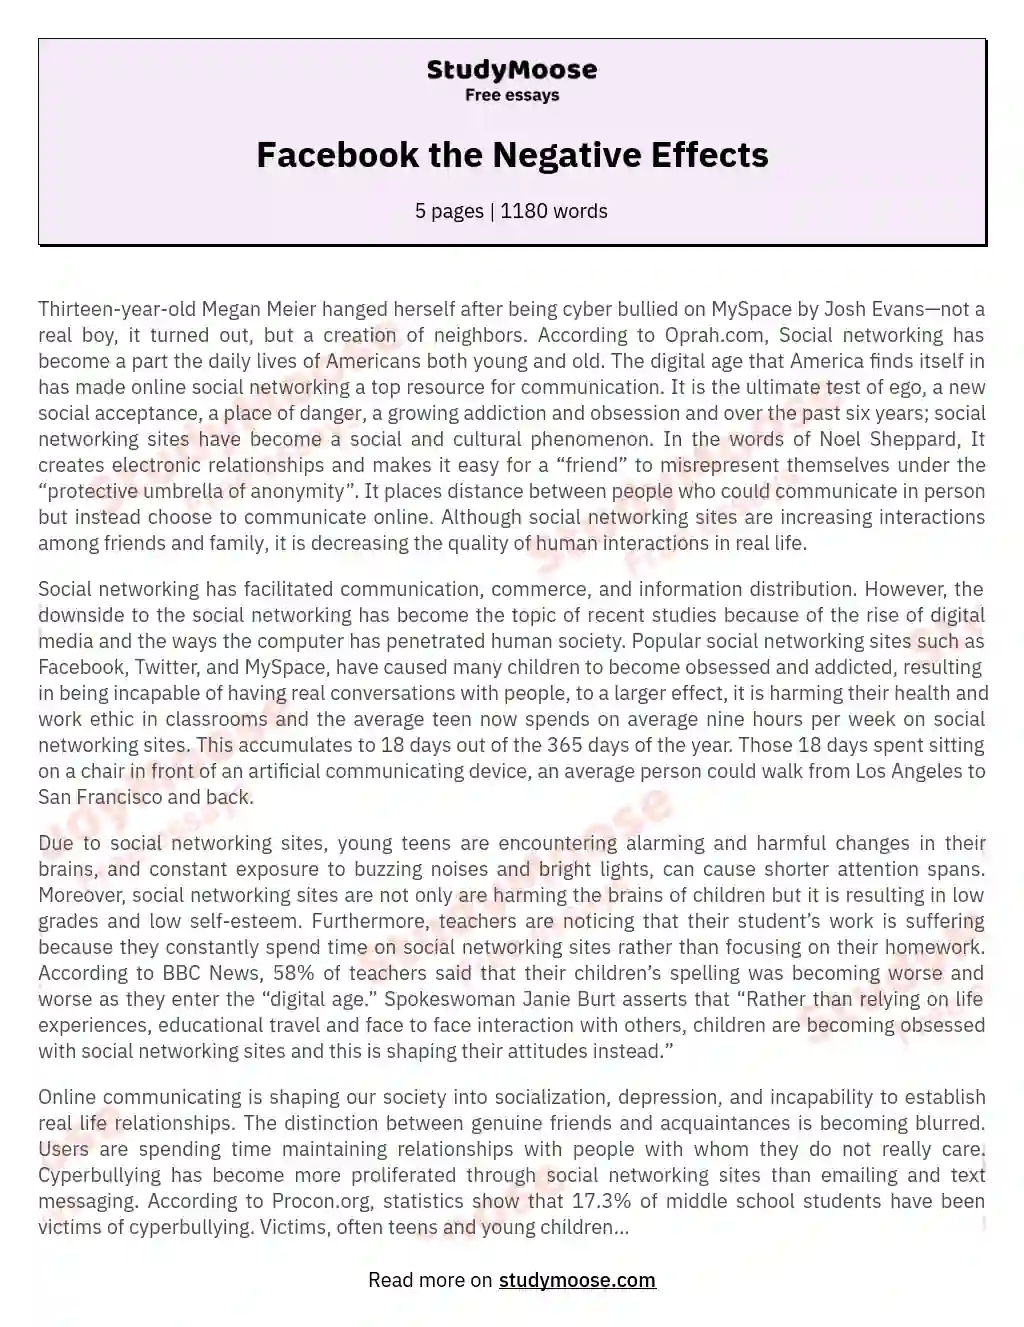 essay on bad effects of facebook